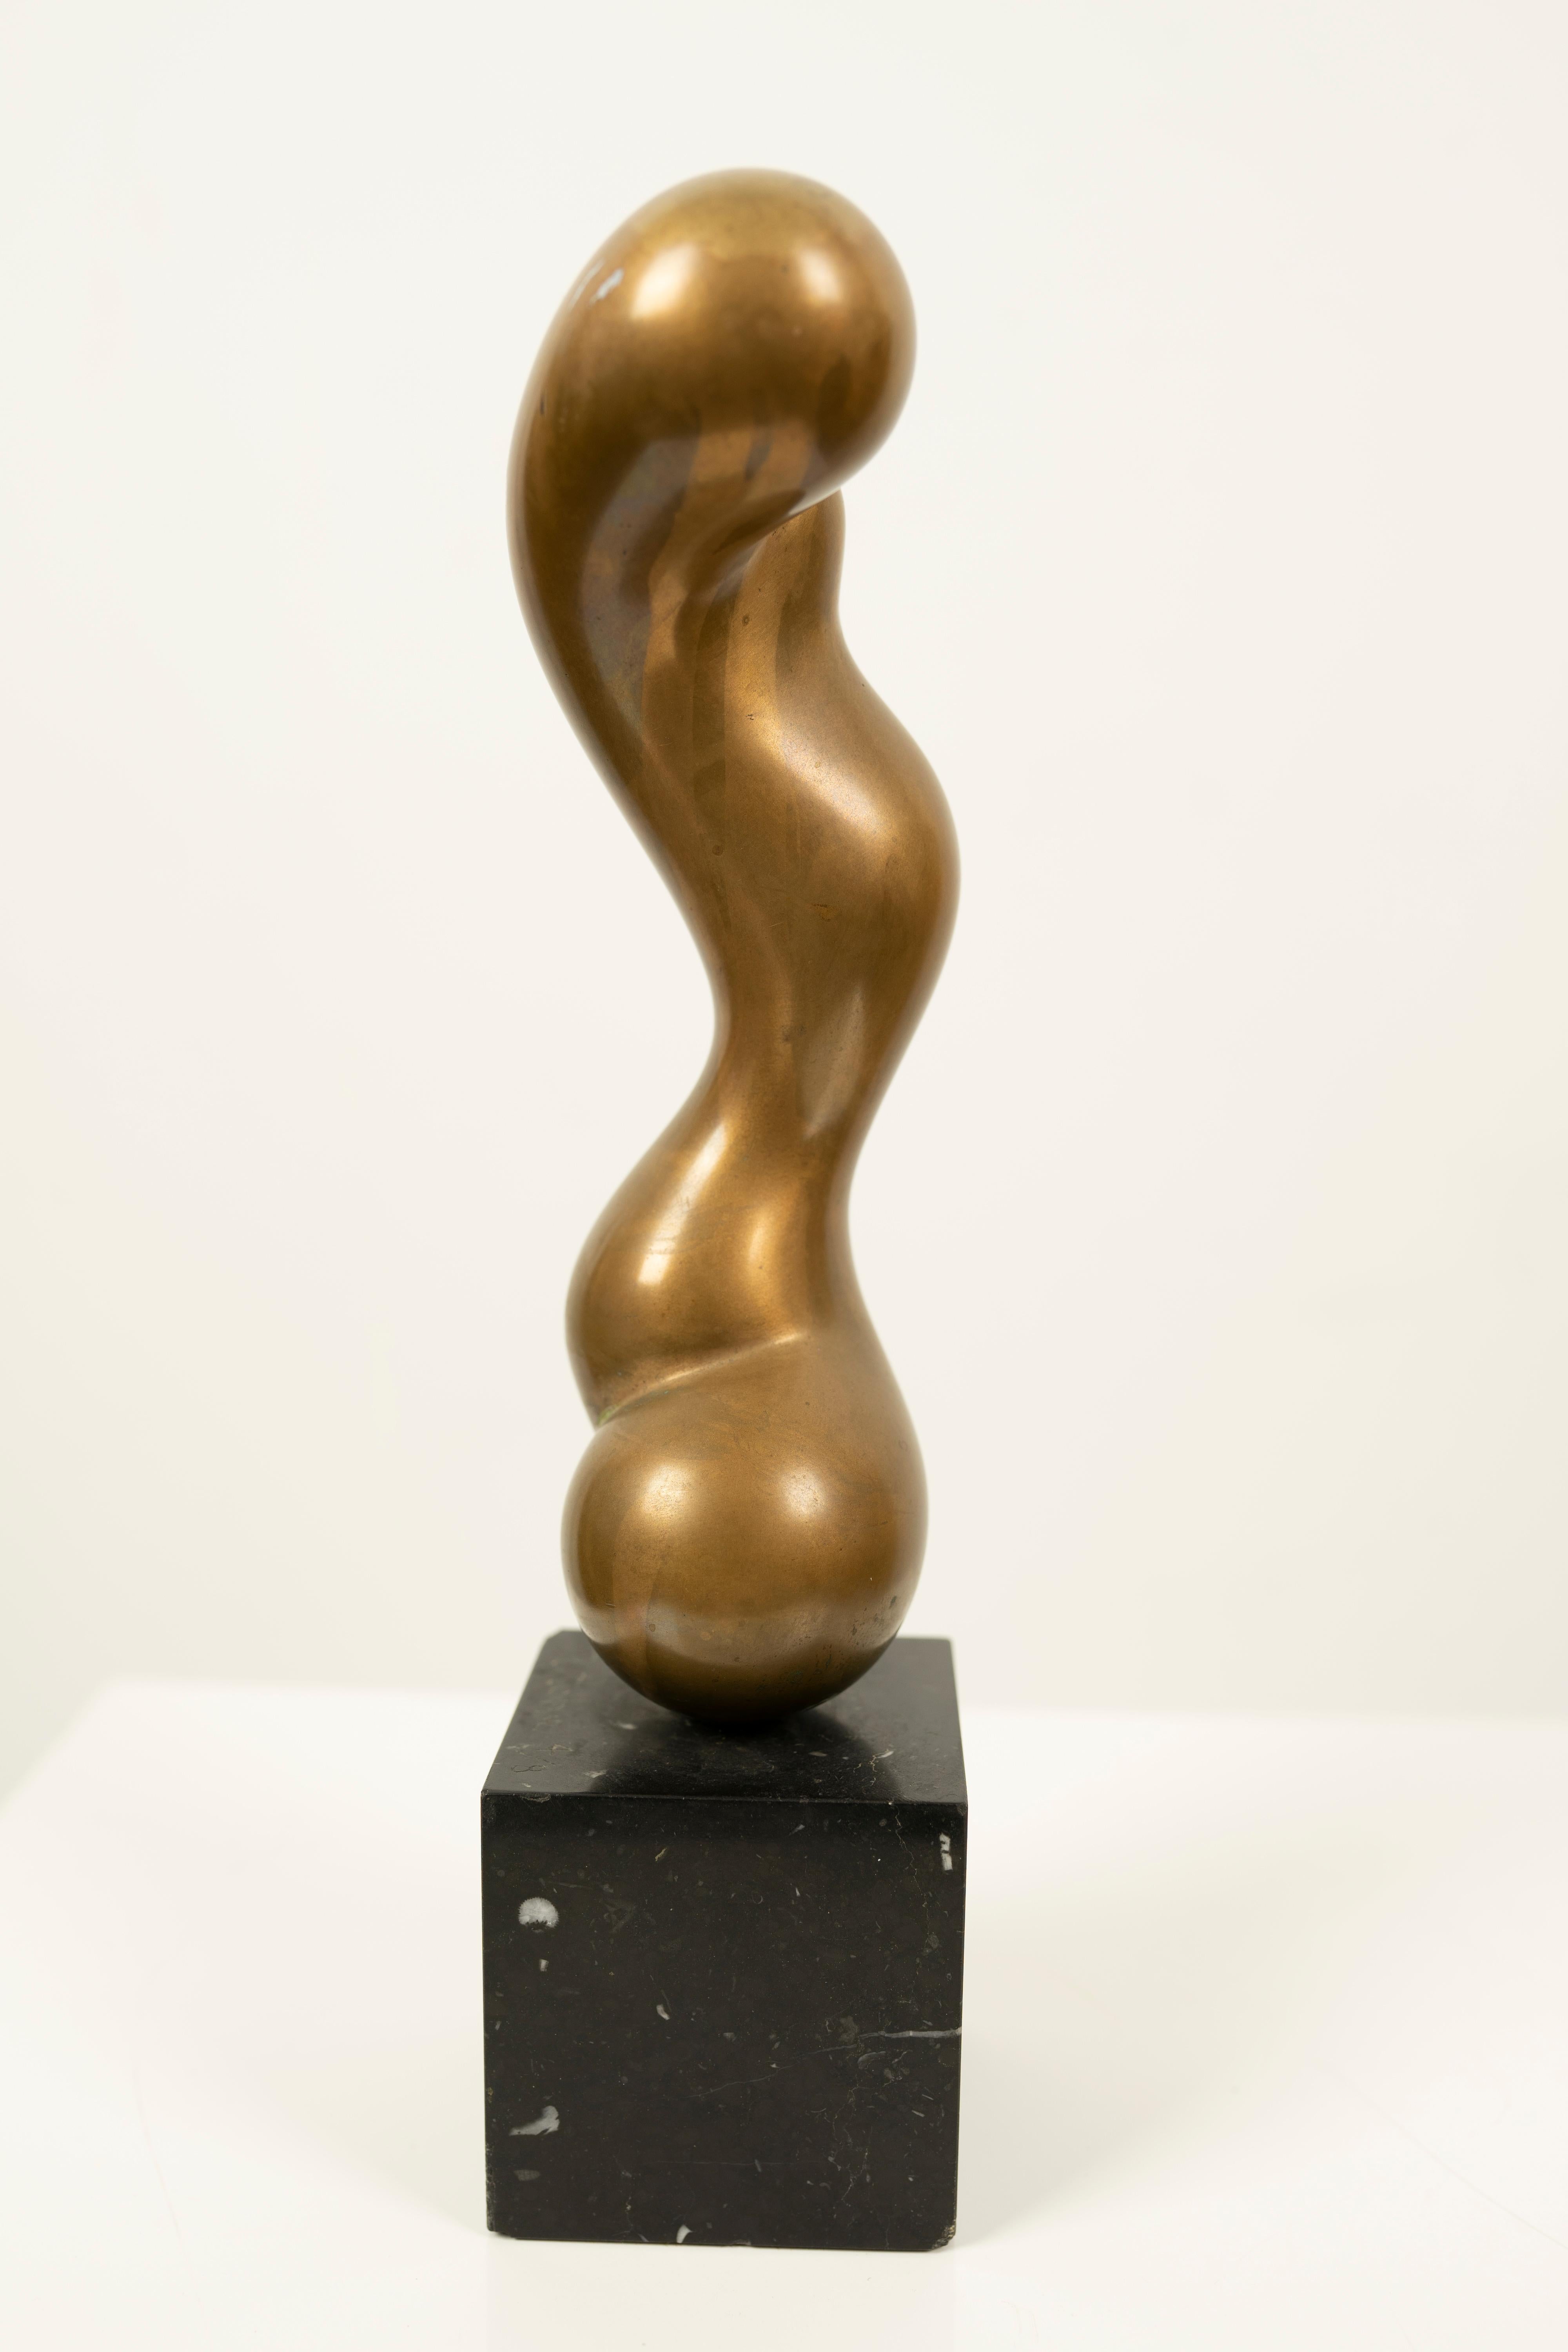 Jim Ritchie Figurative Sculpture - Figural Abstract Bronze Sculpture James Ritchie French Canadian Modernist 